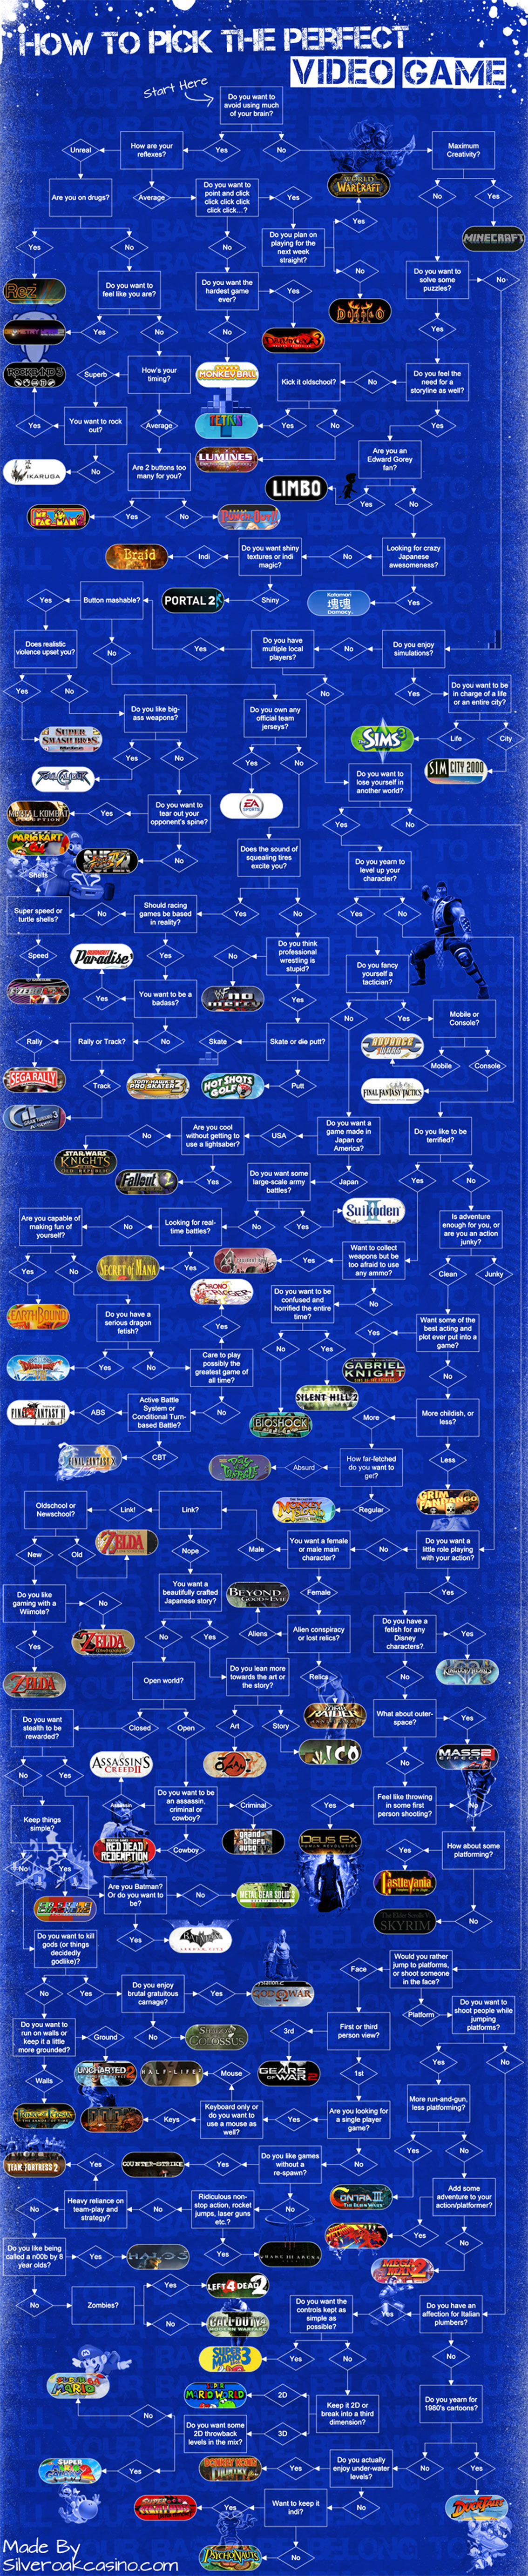 How to Pick the Perfect Video Game Infographic